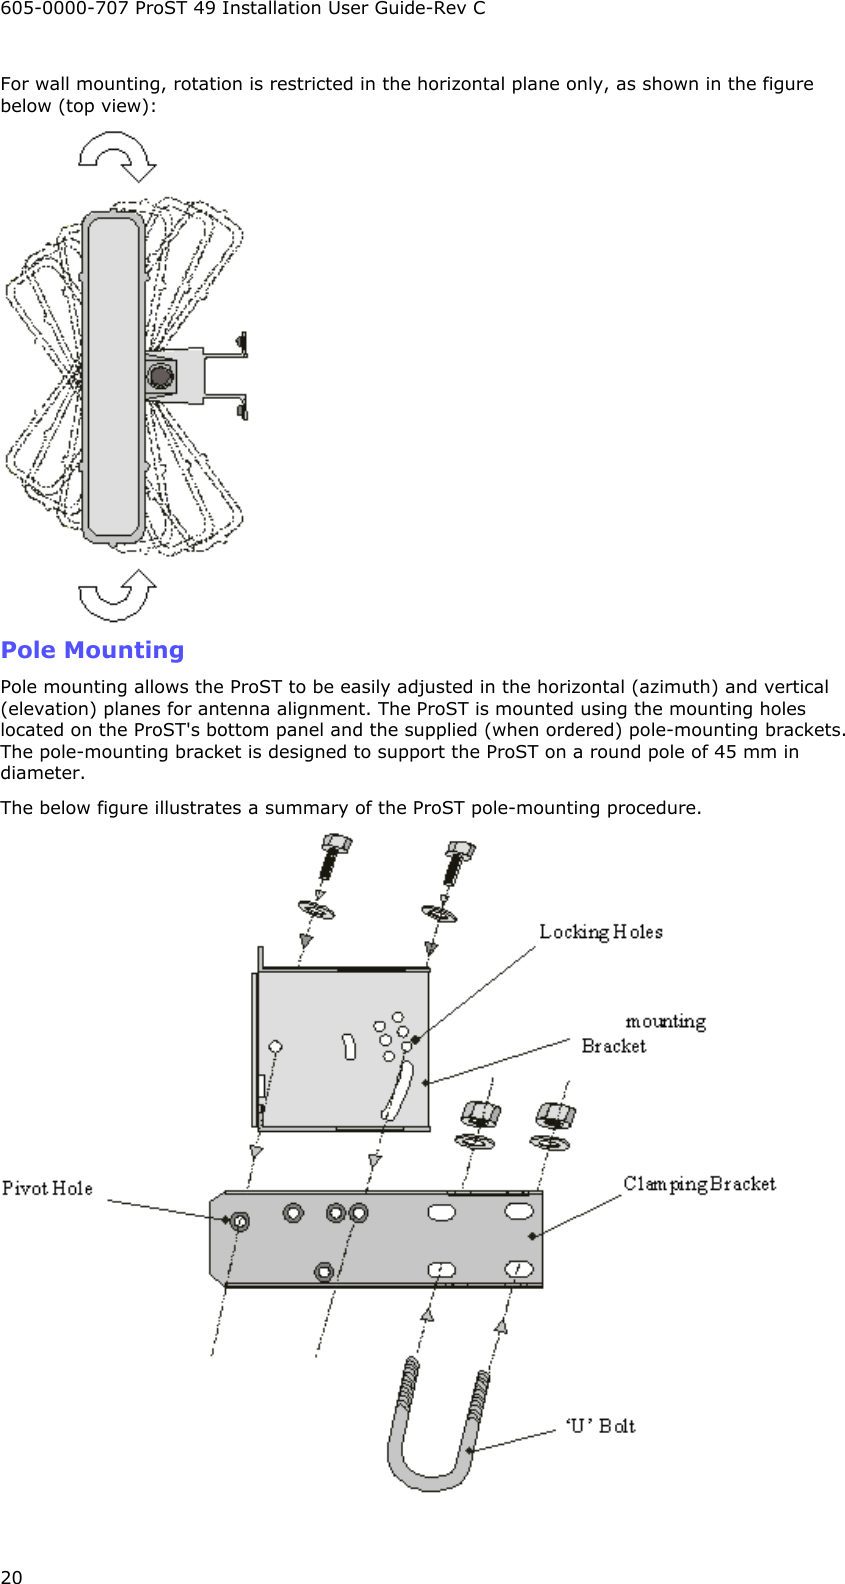 605-0000-707 ProST 49 Installation User Guide-Rev C 20 For wall mounting, rotation is restricted in the horizontal plane only, as shown in the figure below (top view):  Pole Mounting Pole mounting allows the ProST to be easily adjusted in the horizontal (azimuth) and vertical (elevation) planes for antenna alignment. The ProST is mounted using the mounting holes located on the ProST&apos;s bottom panel and the supplied (when ordered) pole-mounting brackets. The pole-mounting bracket is designed to support the ProST on a round pole of 45 mm in diameter. The below figure illustrates a summary of the ProST pole-mounting procedure.   